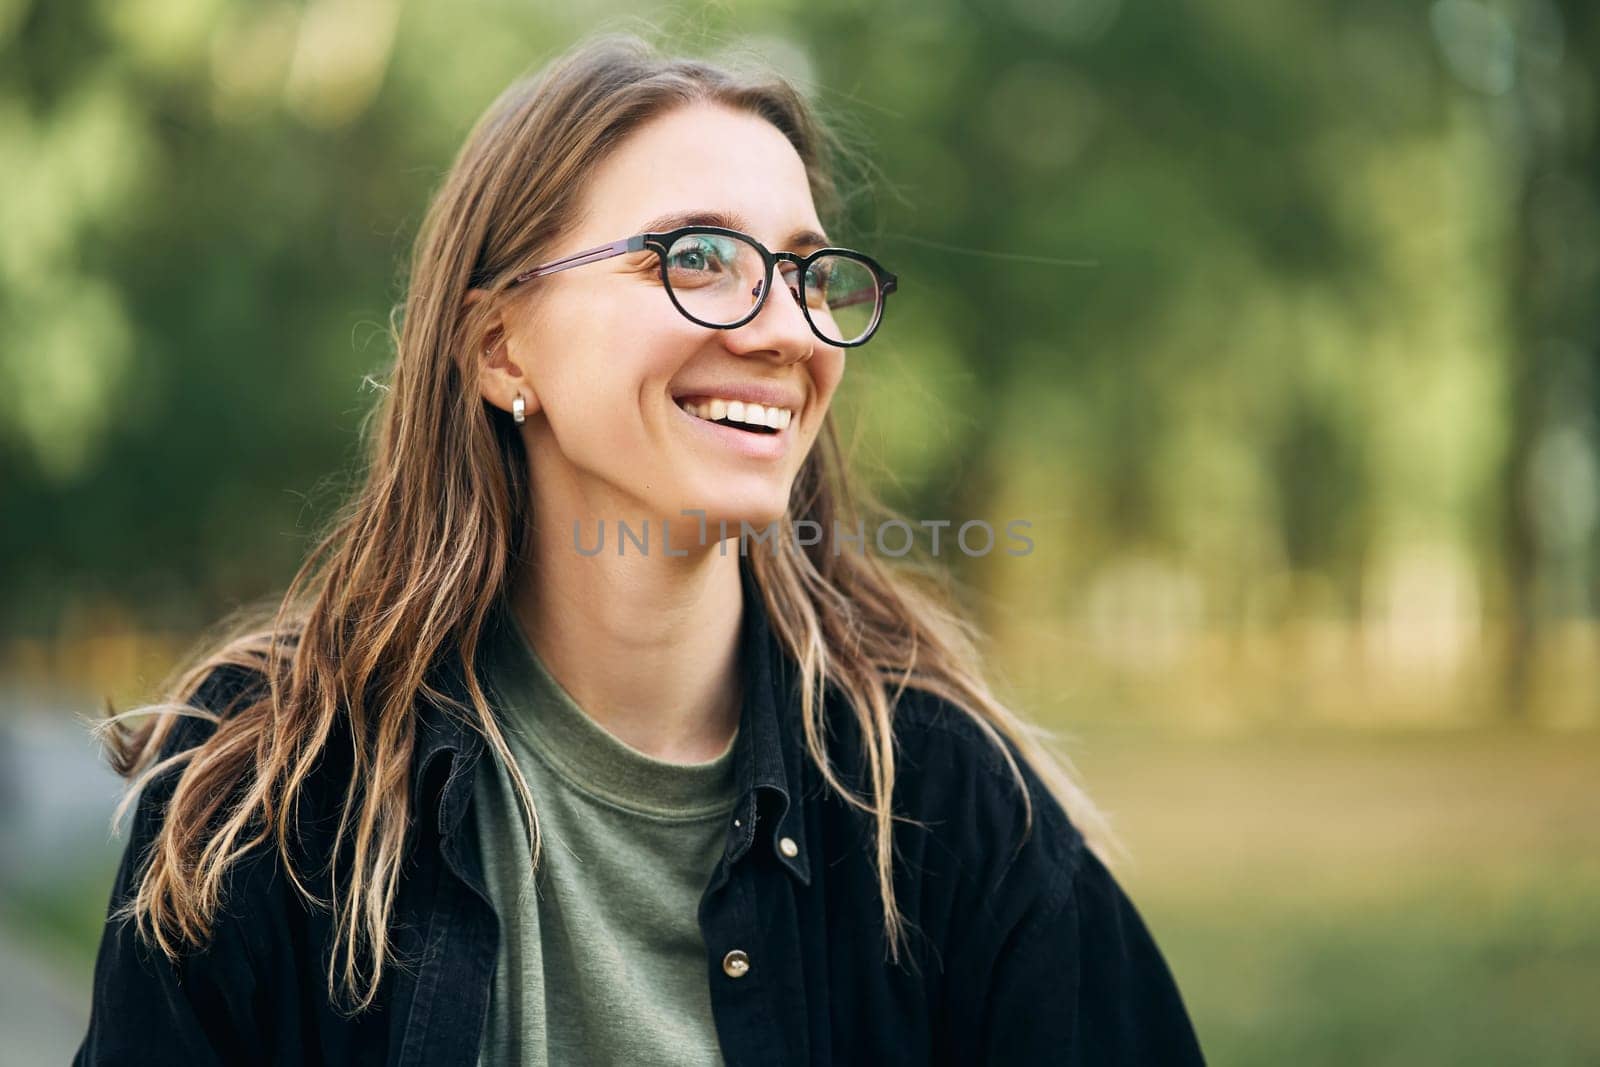 Portrait of a smiling young girl with glasses in the park by driver-s